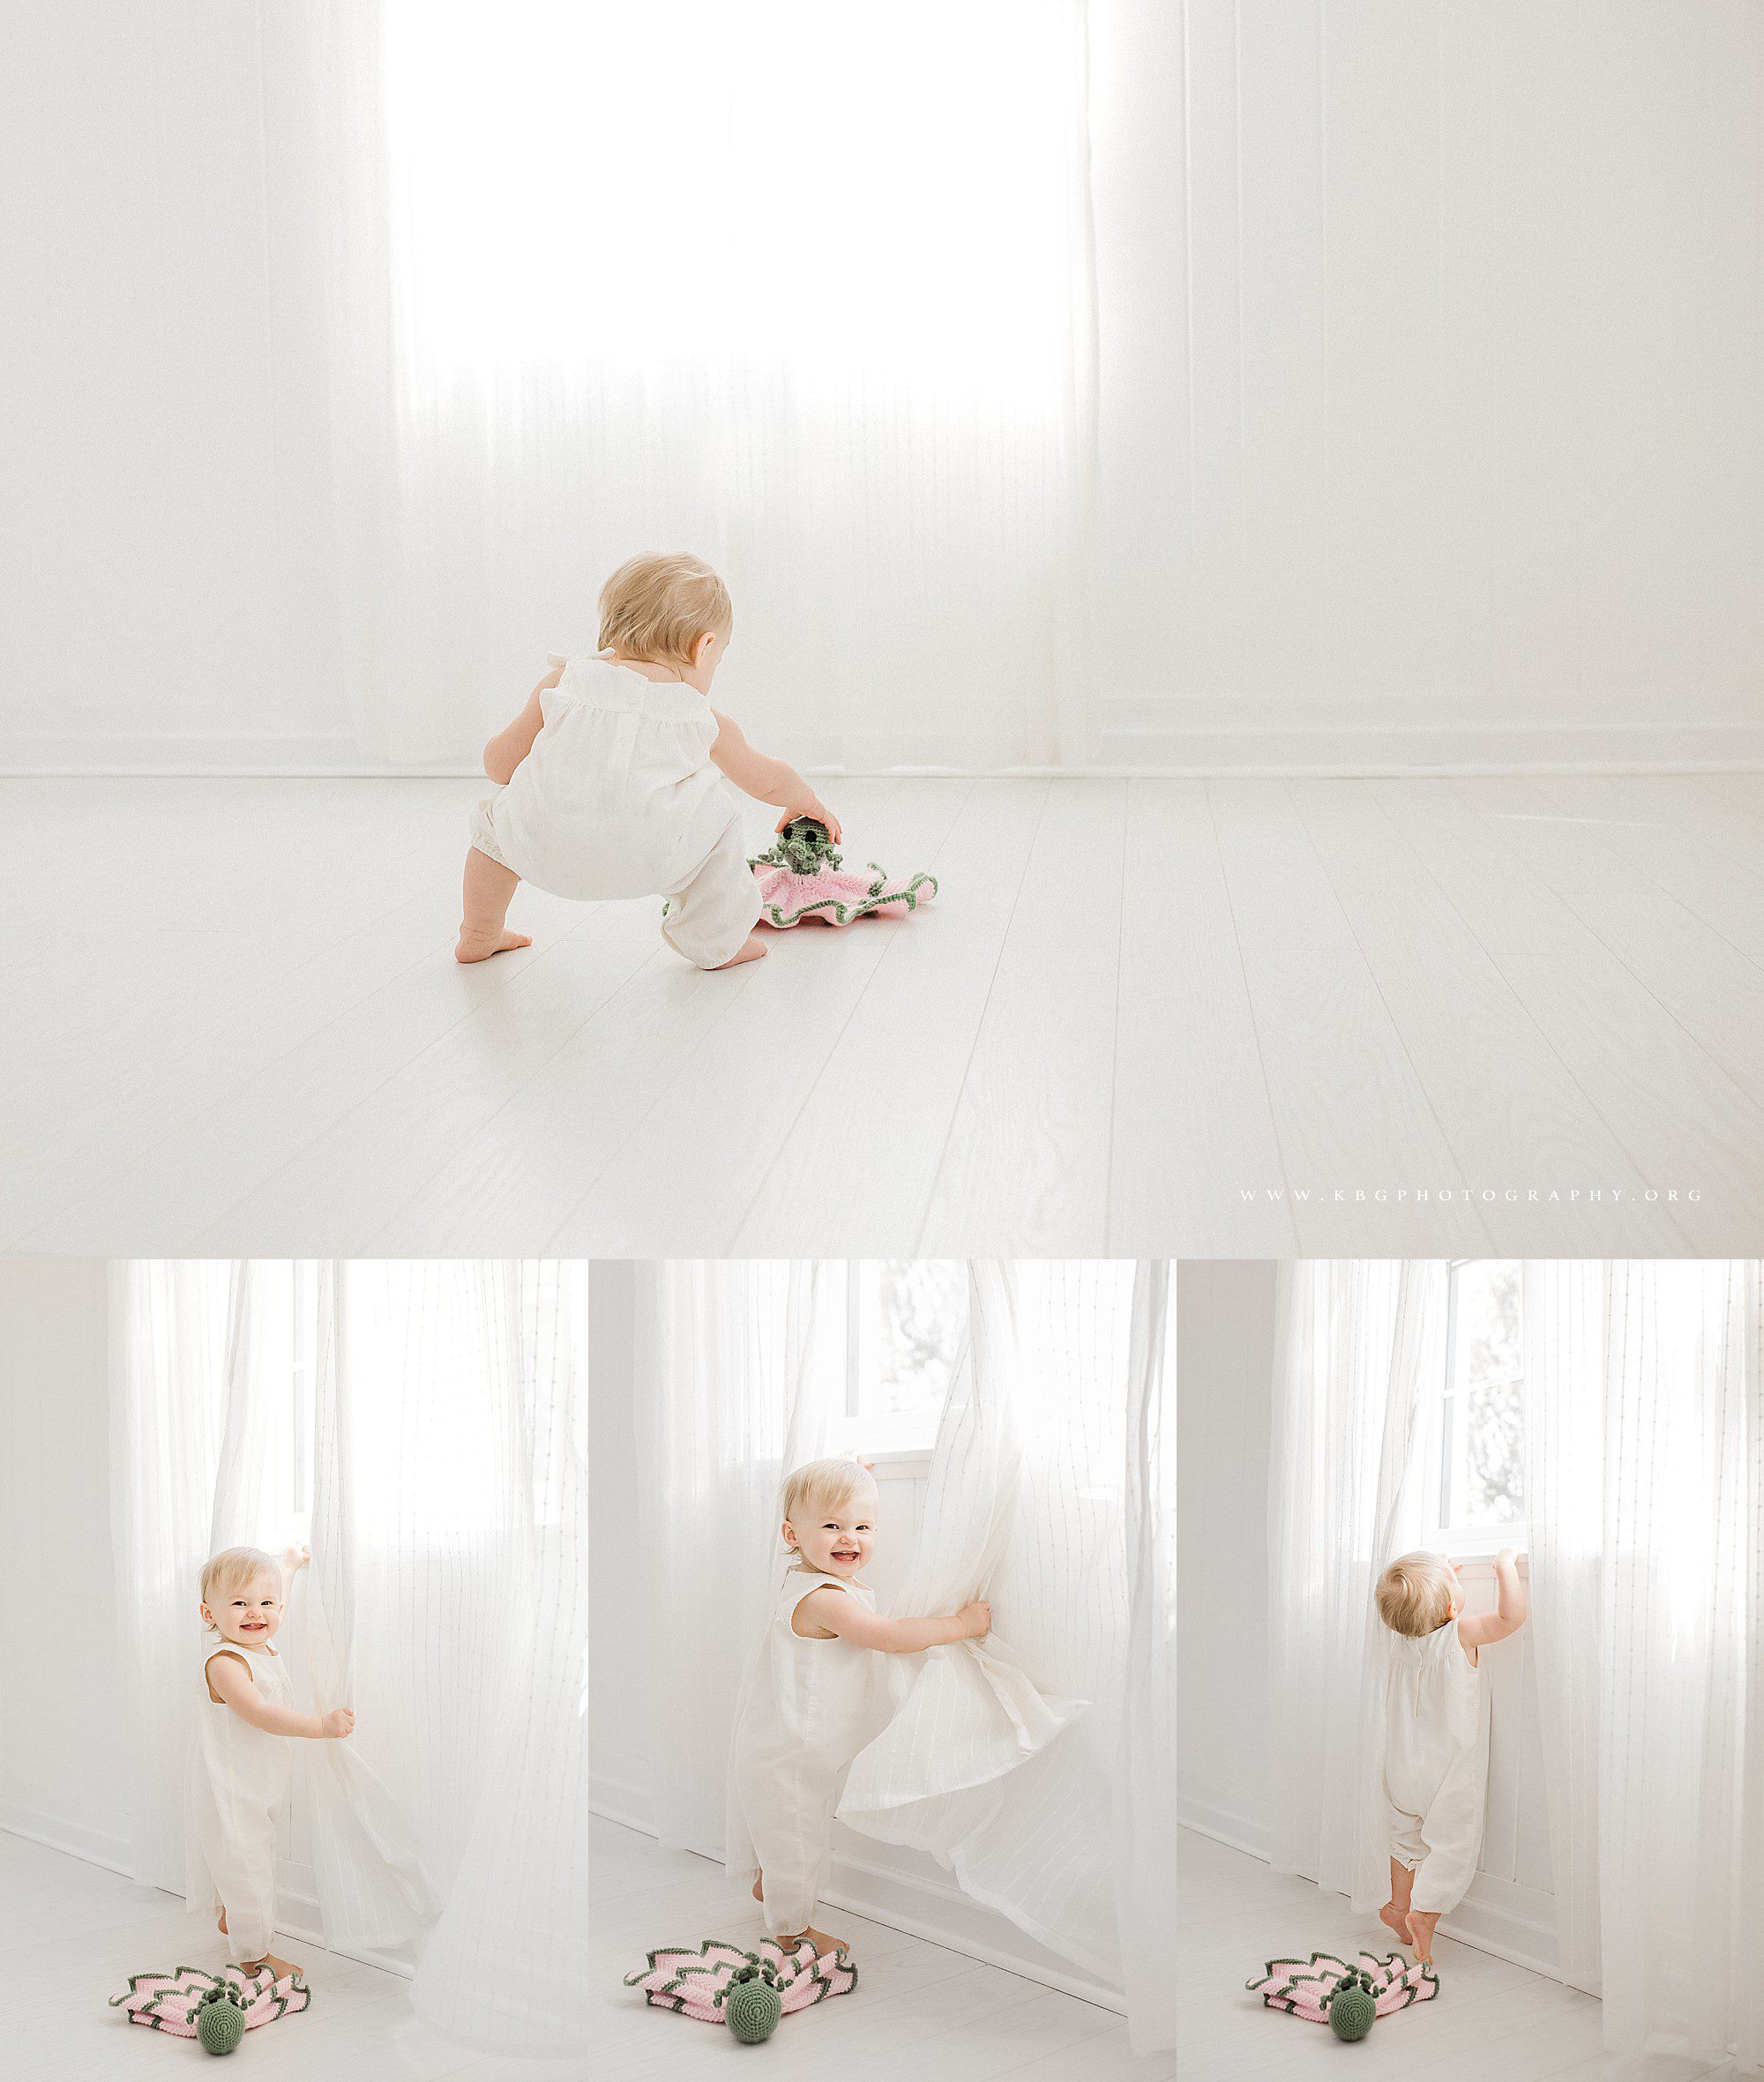 smyrna family photographer - one year old baby playing in the window curtain